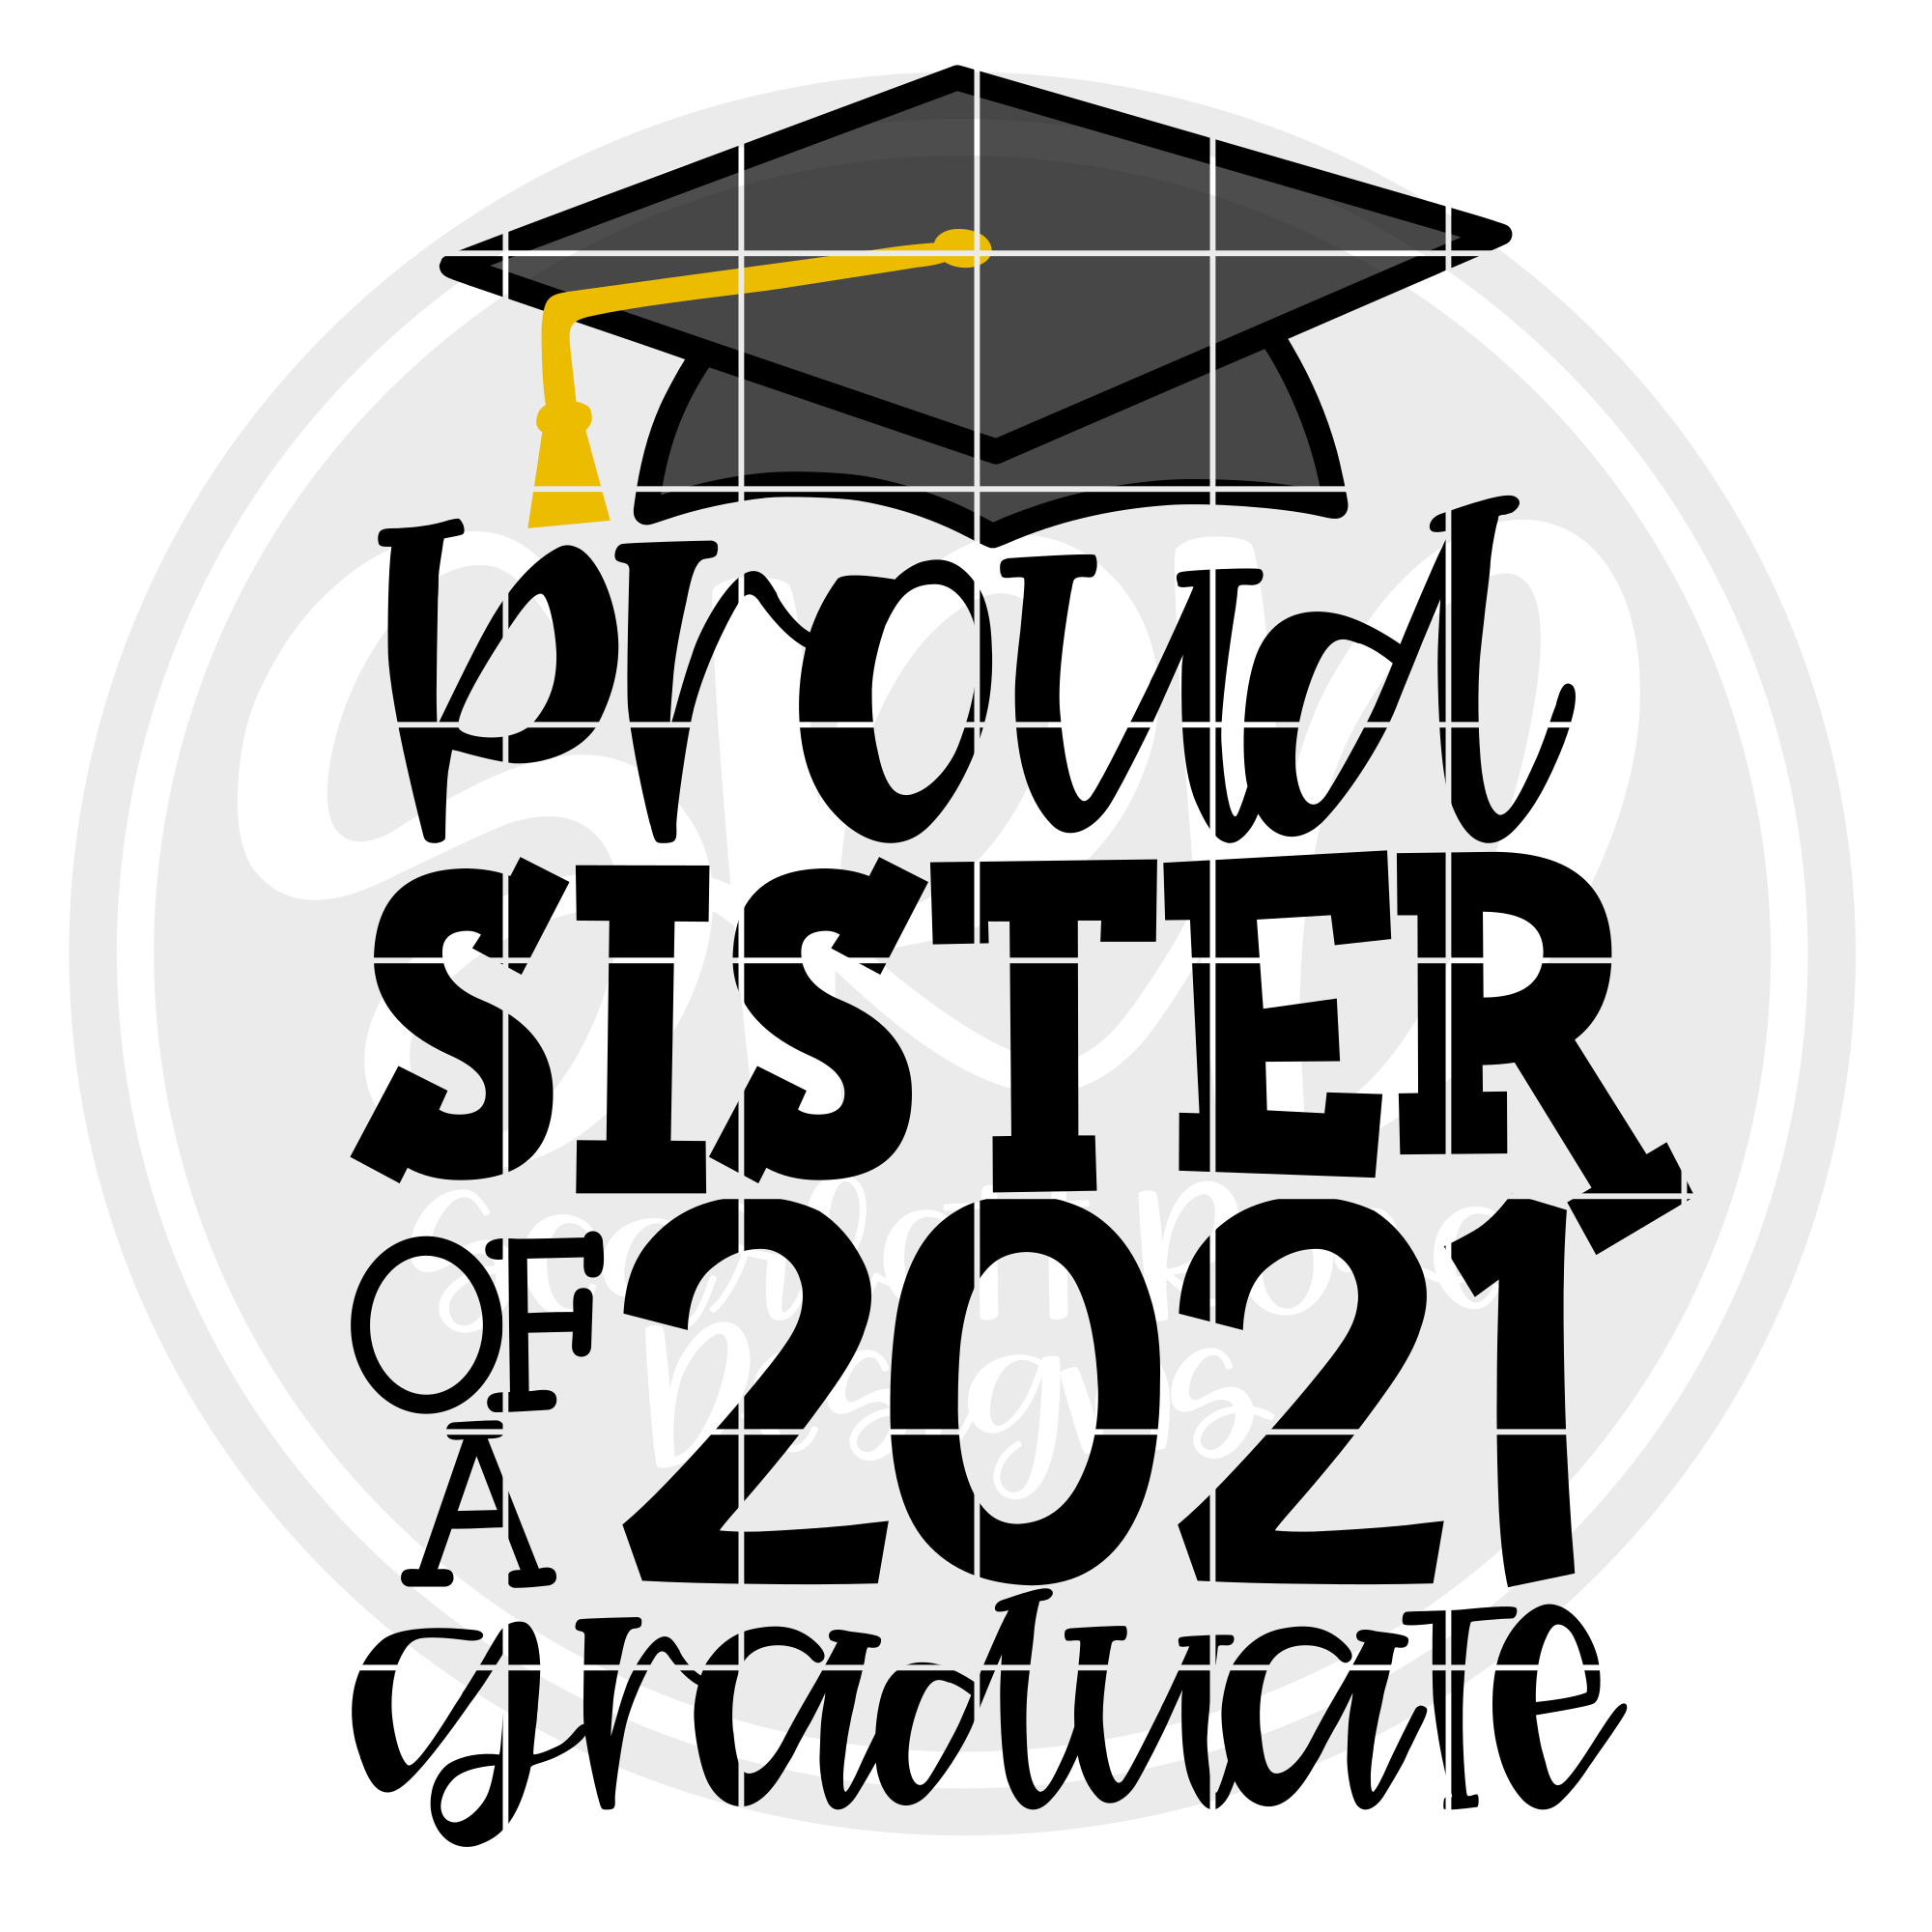 Download Graduation Shirt Svg Proud Sister Of The Svg Proud Sister Of A 2021 Graduate Family Of The Graduate Svg Proud Sister Of A Senior Clip Art Art Collectibles